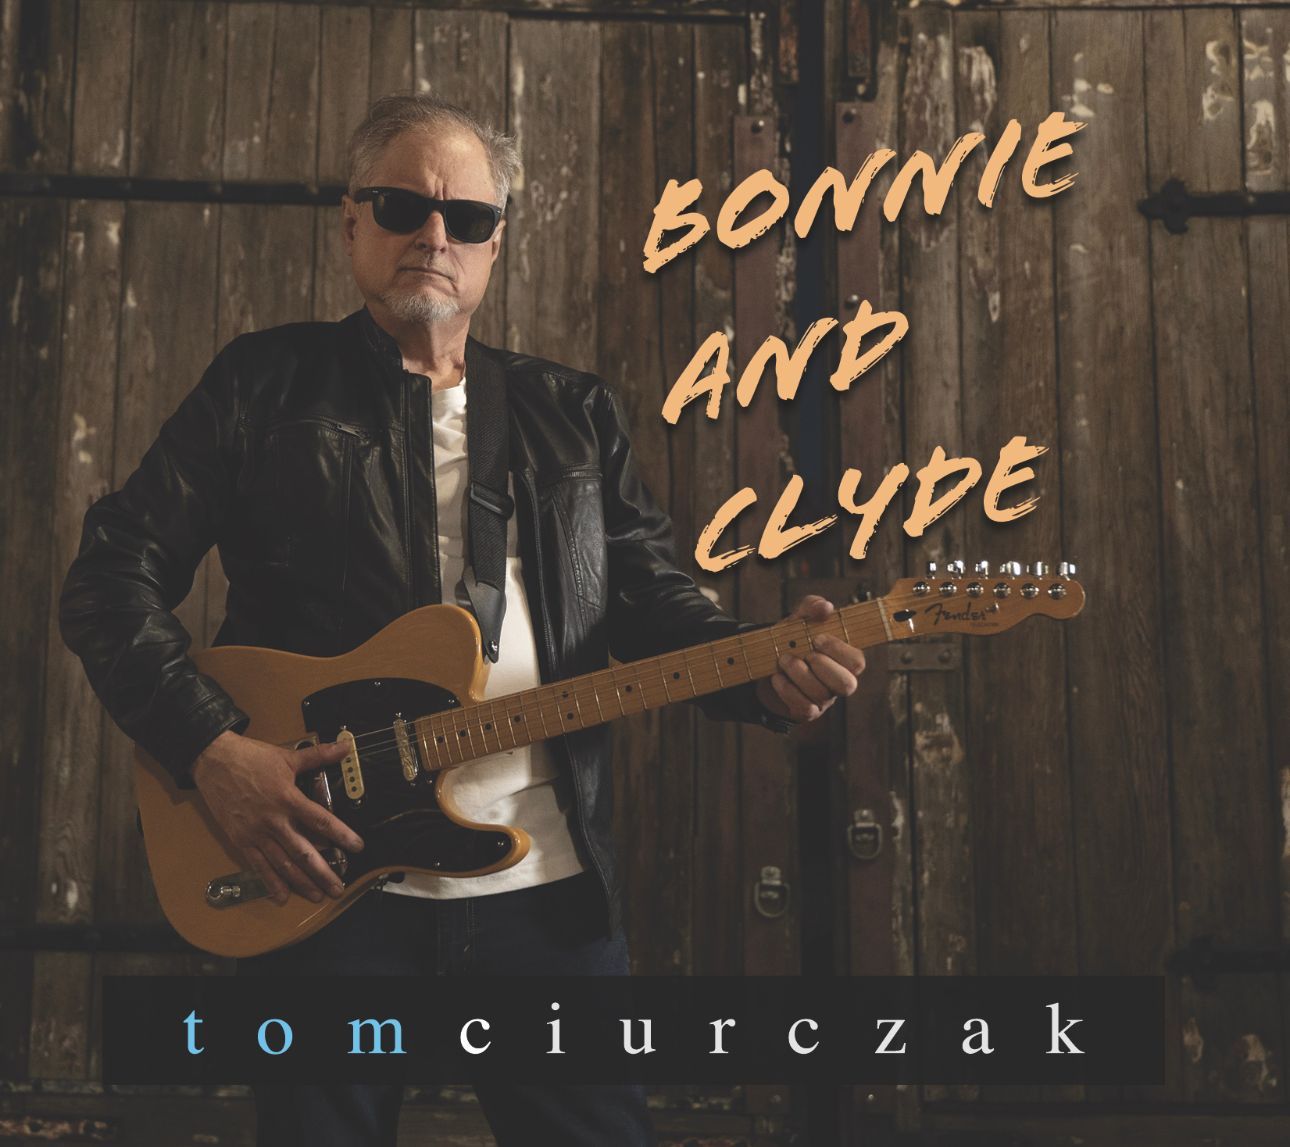 This original Bonnie and Clyde single is the new outlaw rock song written by Tom Ciurczak